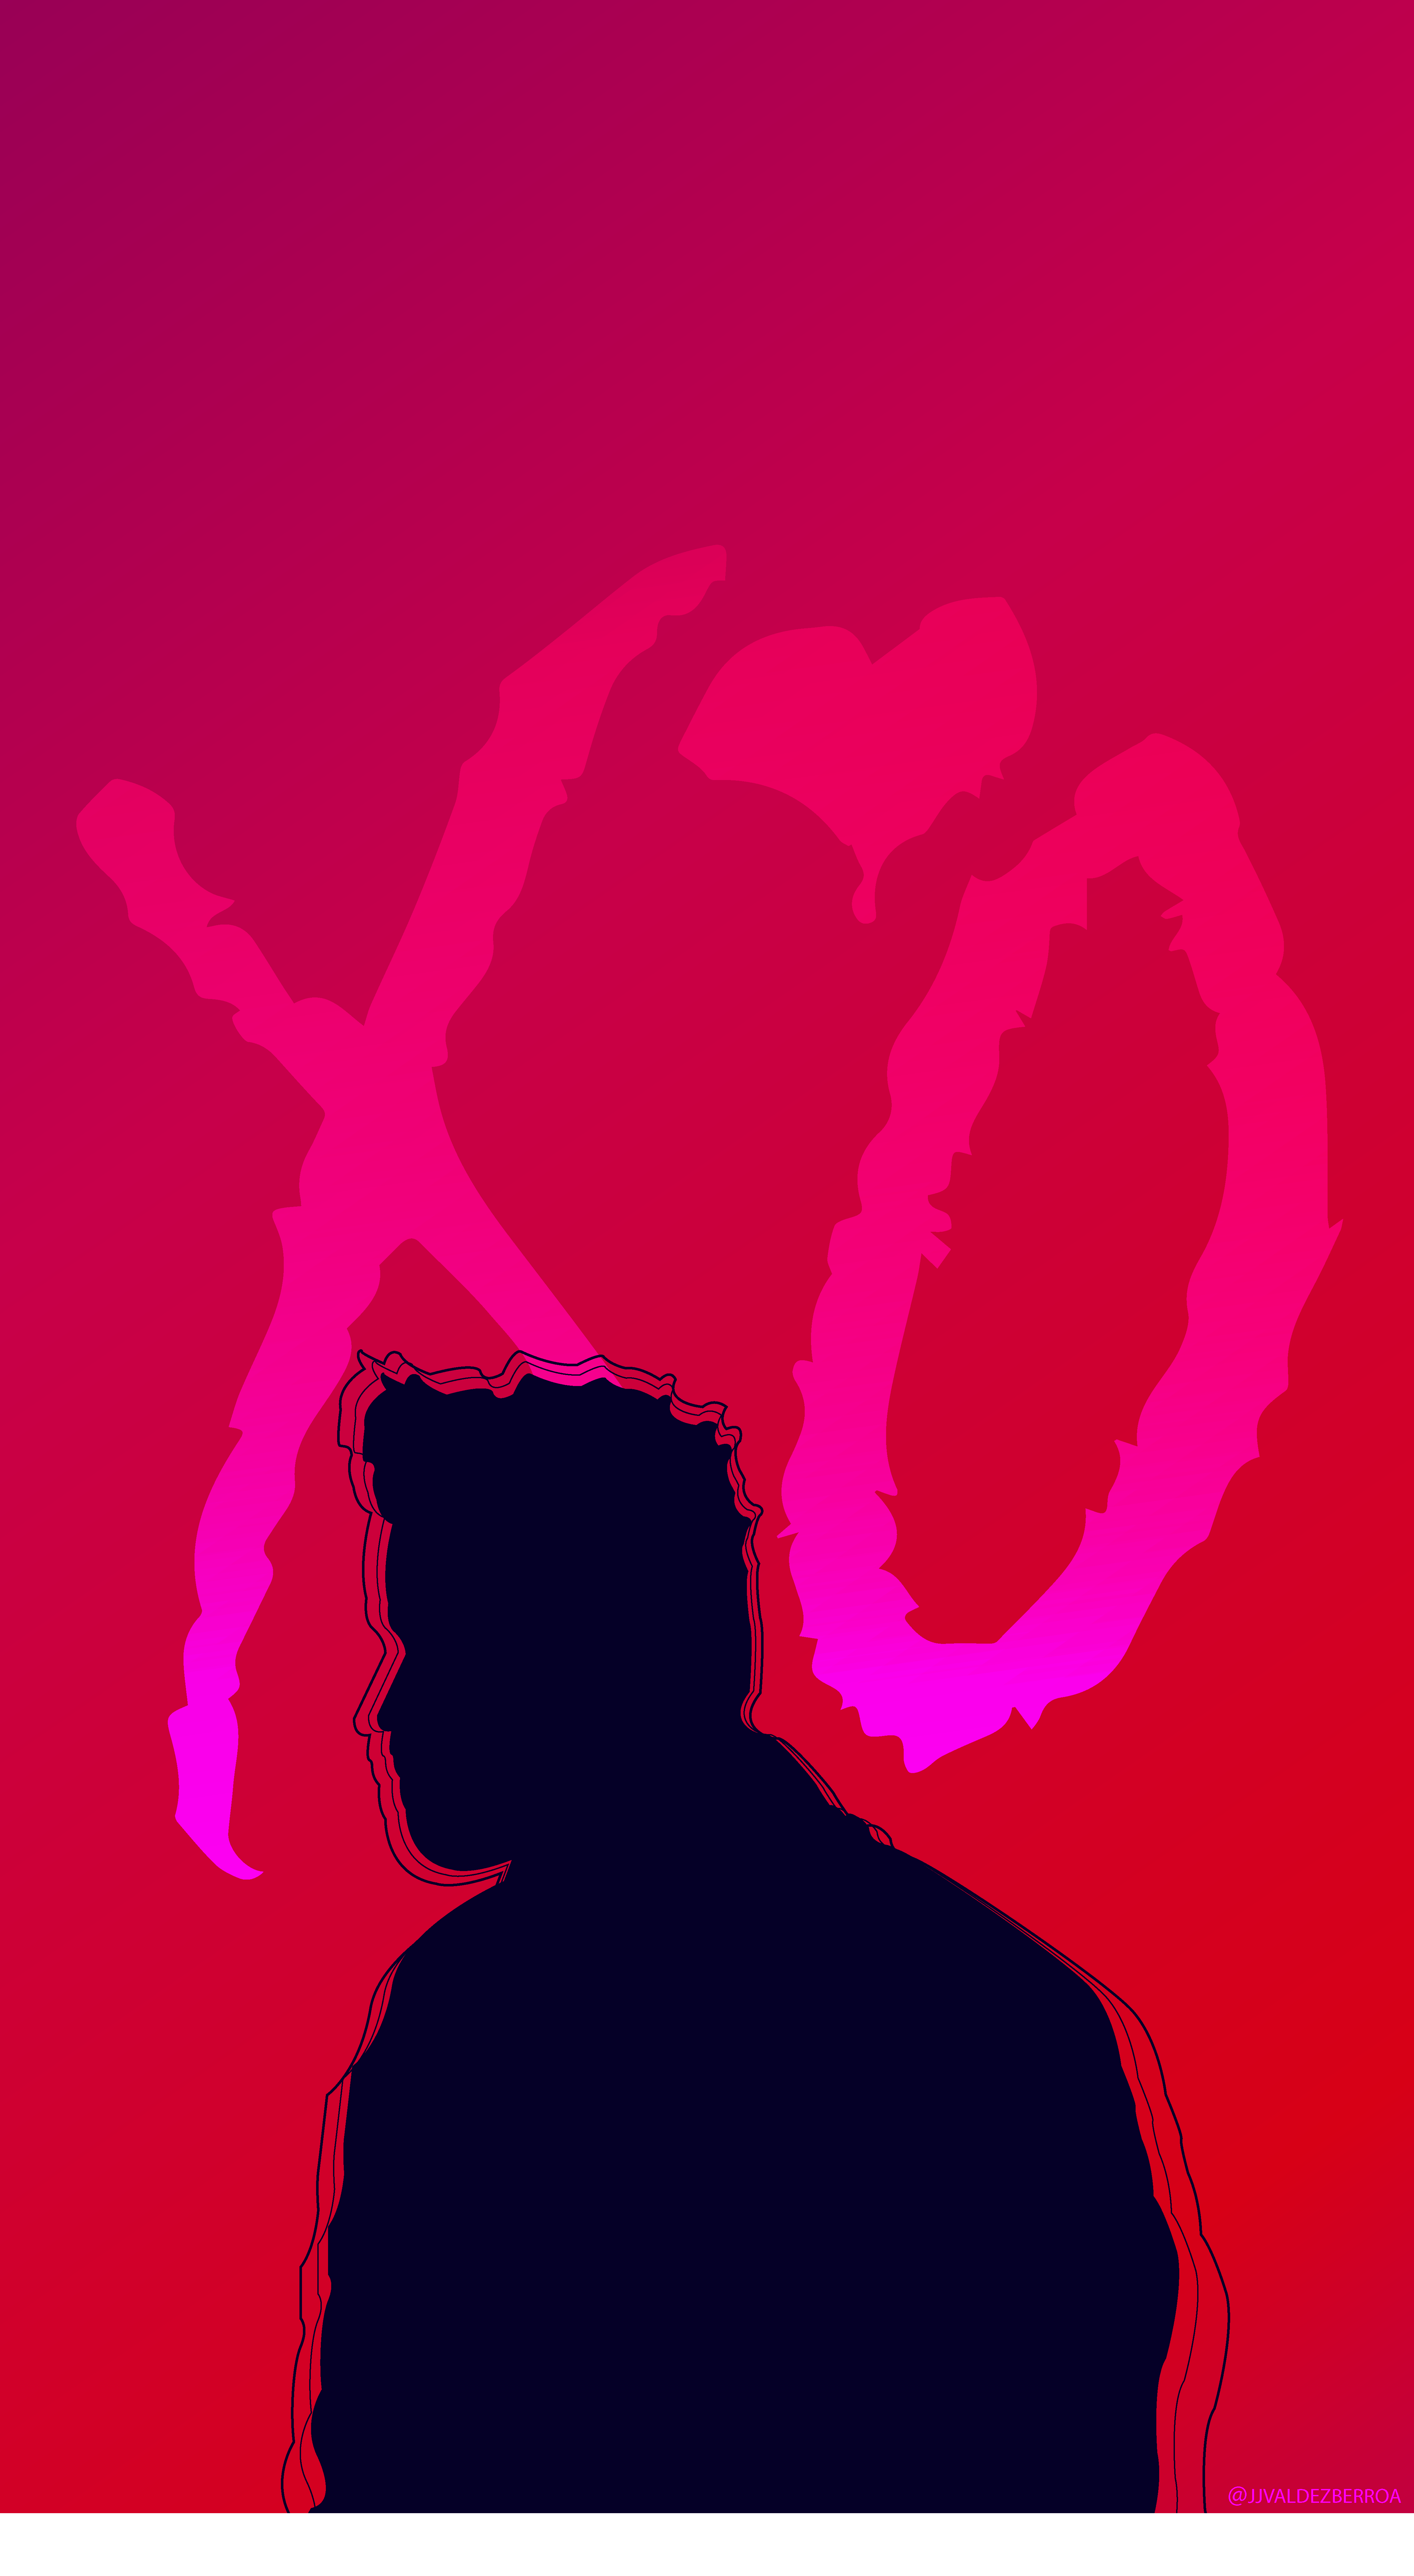 Weeknd #Background #Phone #iPhone6 #Plus Follow me for moree